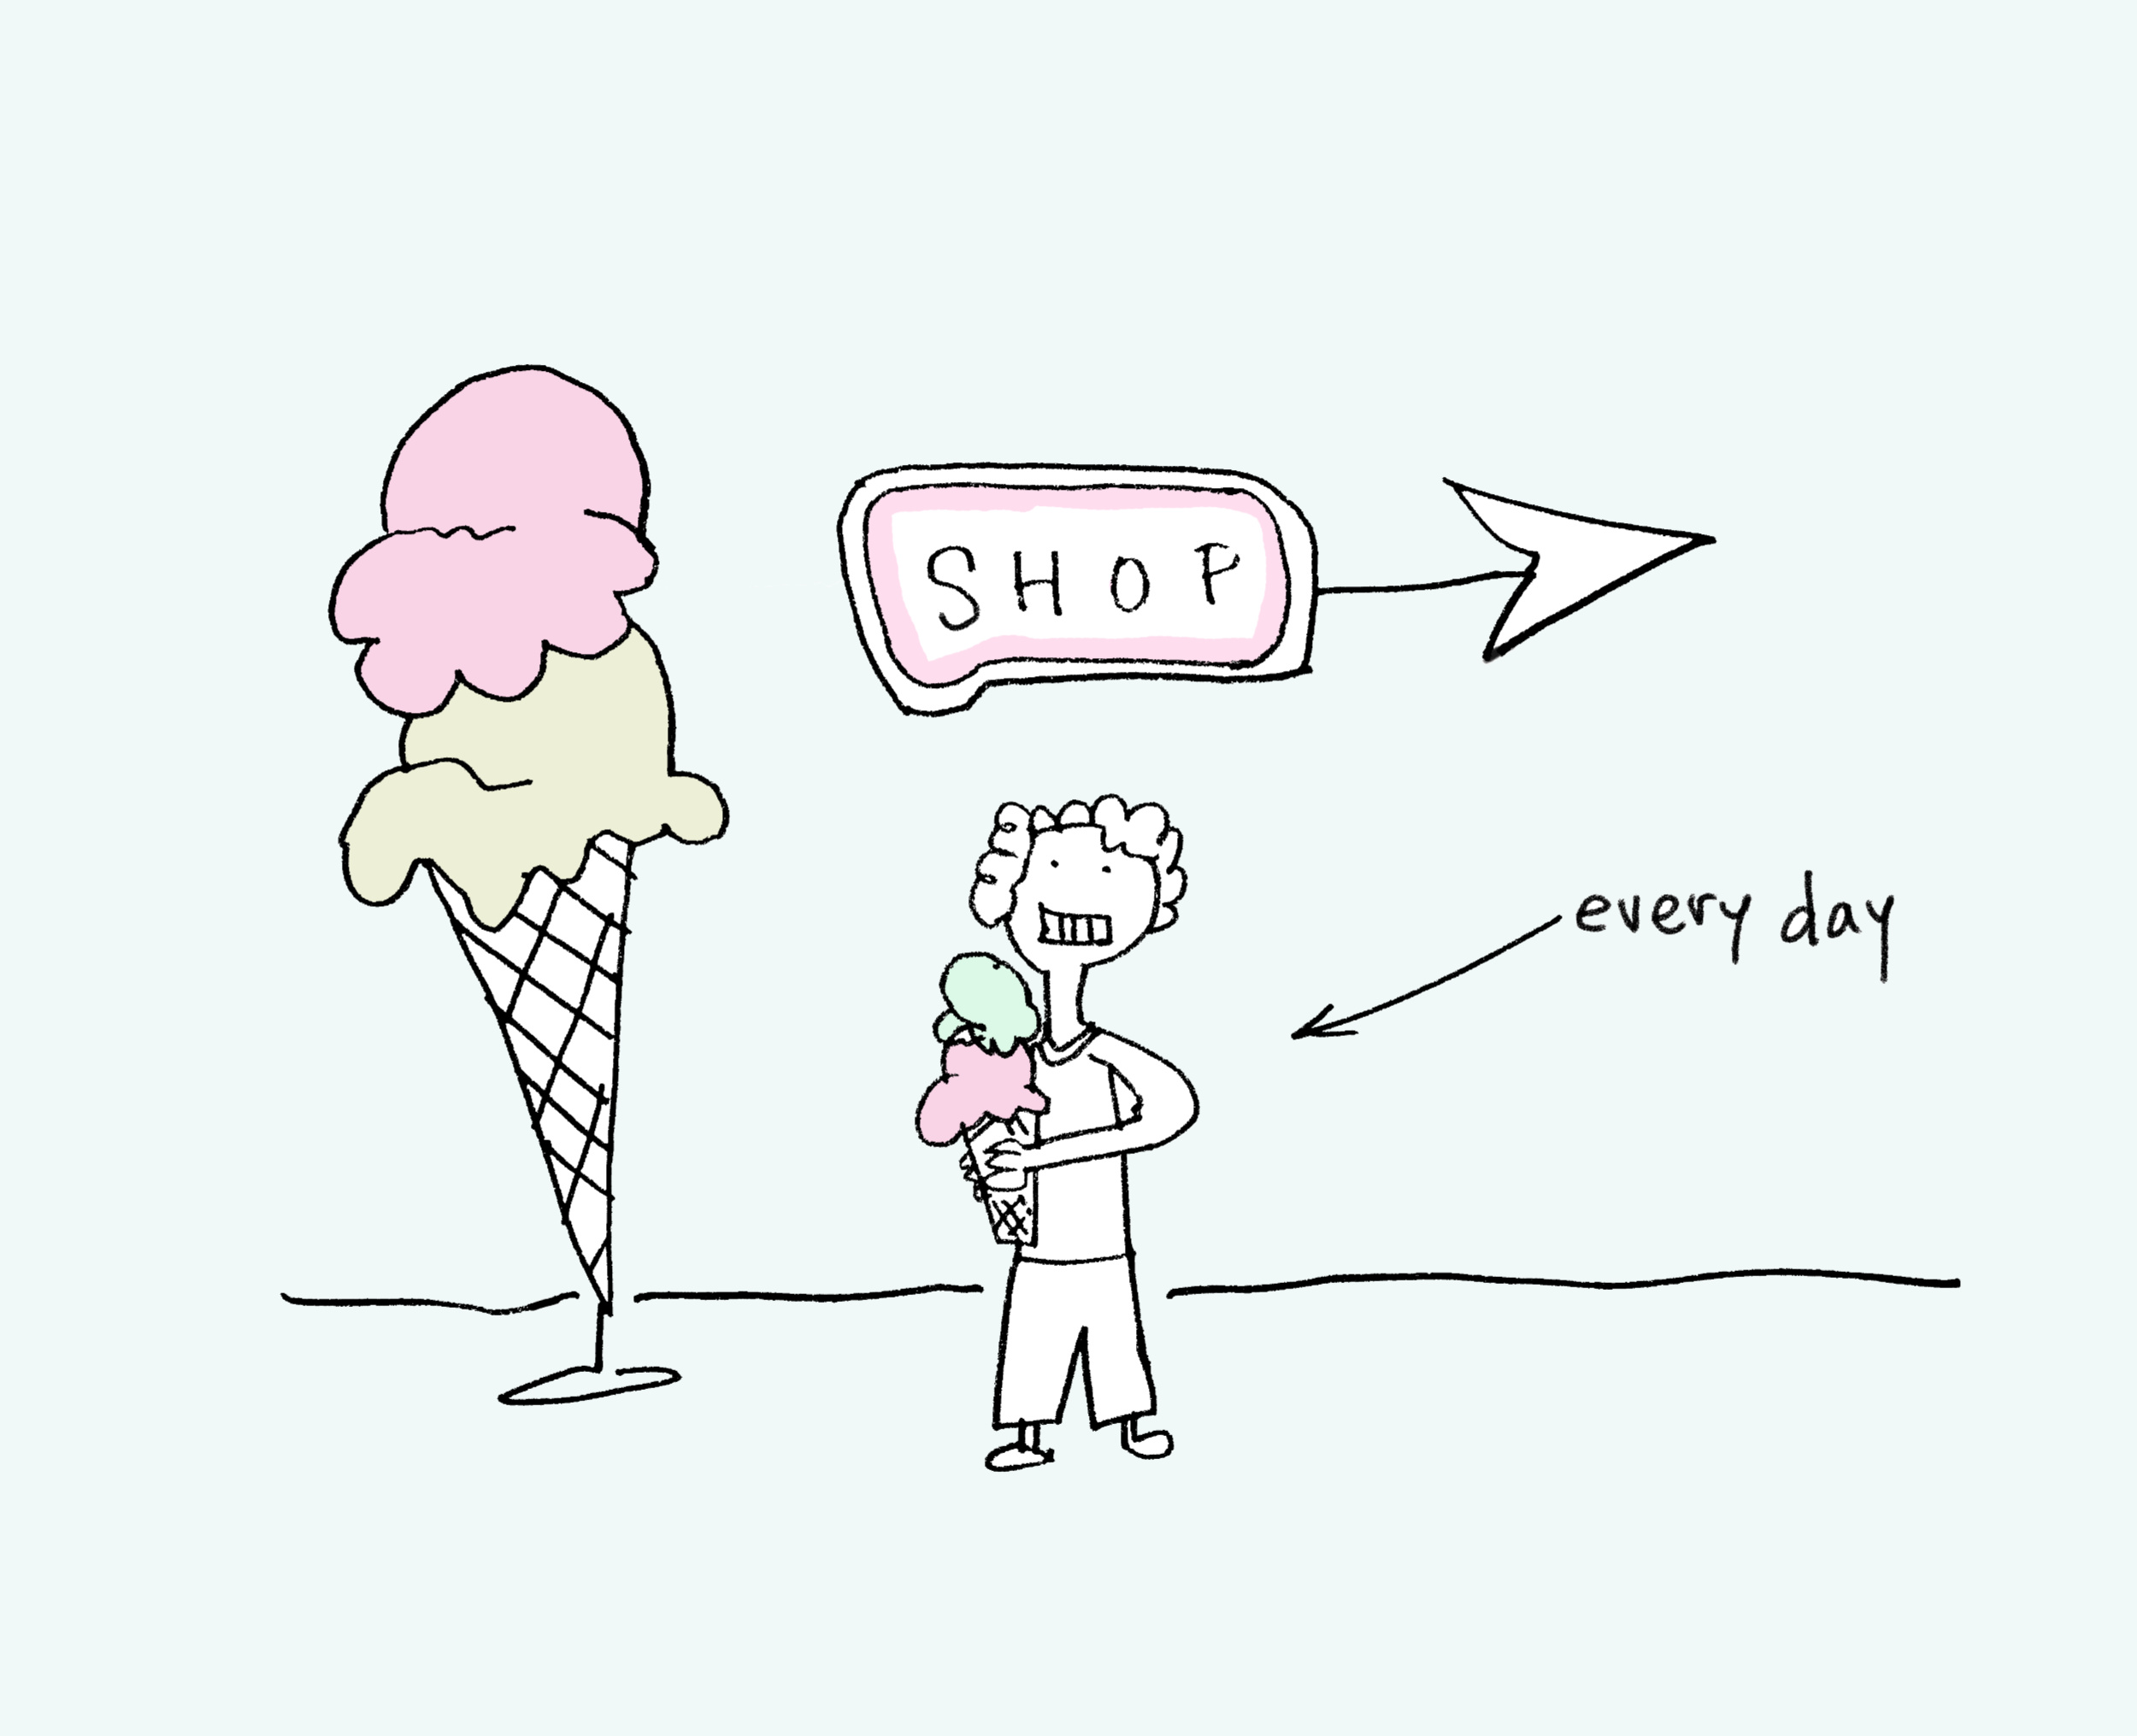 art every day number 707 illustration quelle surprise ice cream true story jjbright